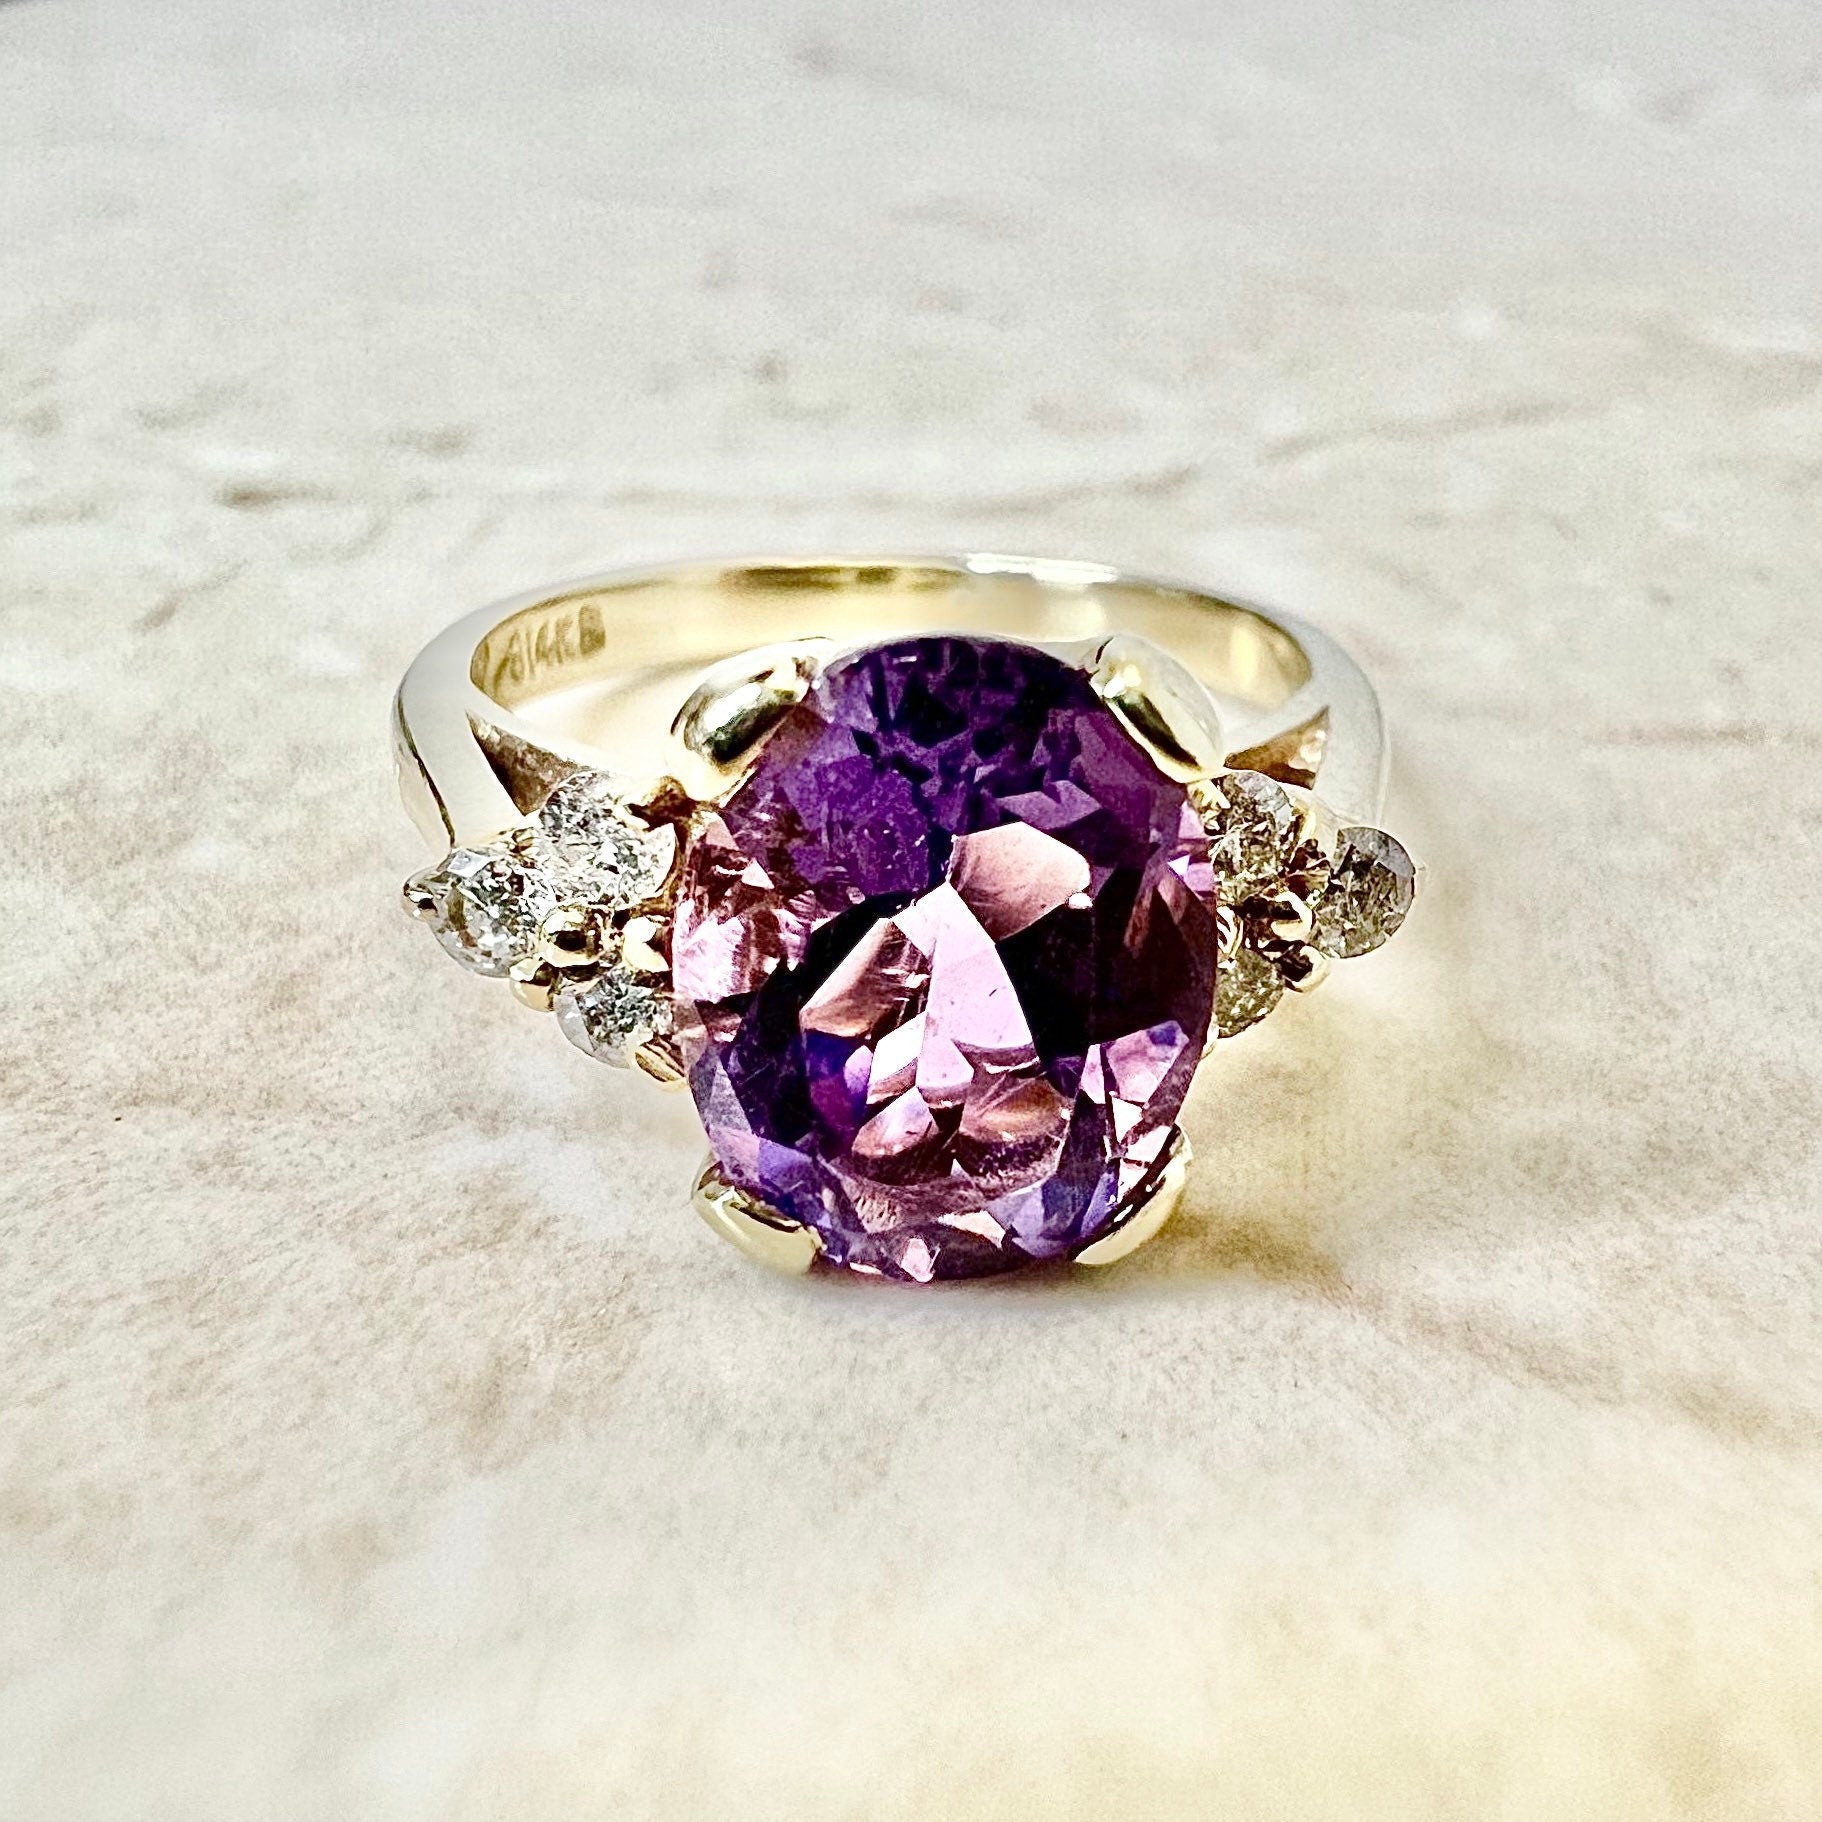 14K Oval Amethyst & Diamond Ring - Yellow Gold Cocktail Ring - Birthday Gift - Love Ring - February Birthstone - Gift For Her - Jewelry Sale